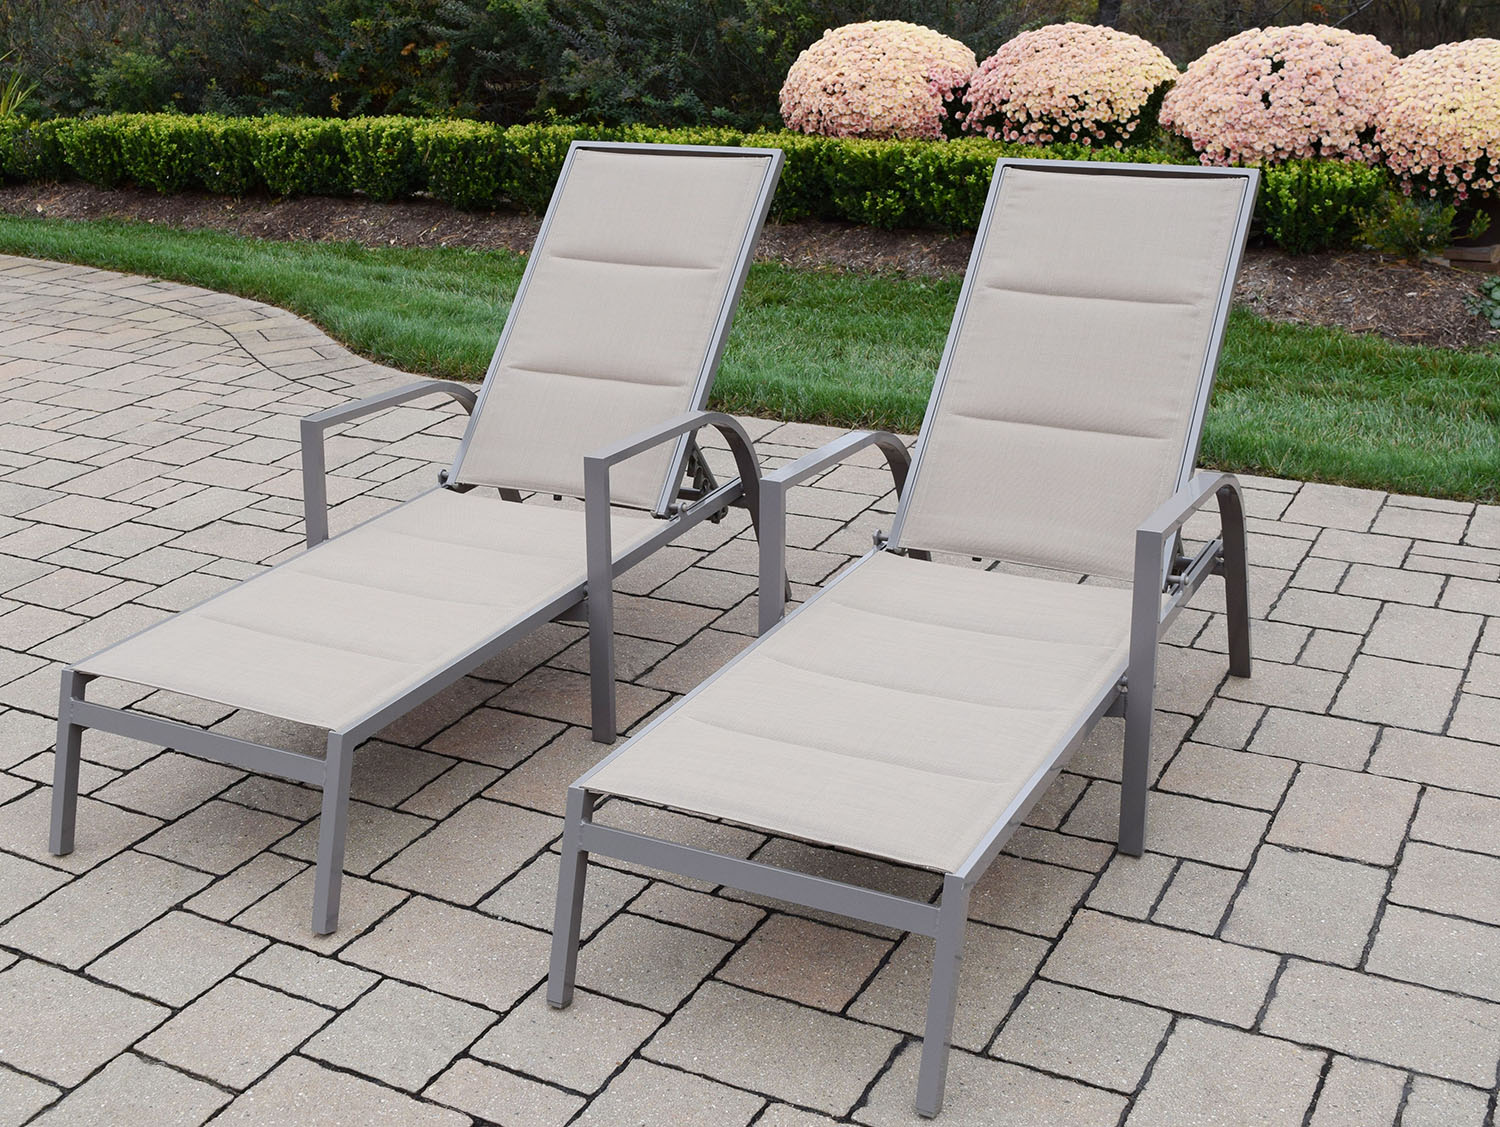 Oakland Pair Of 2 Padded Sling Aluminum Chaise Lounges (set Of 2)